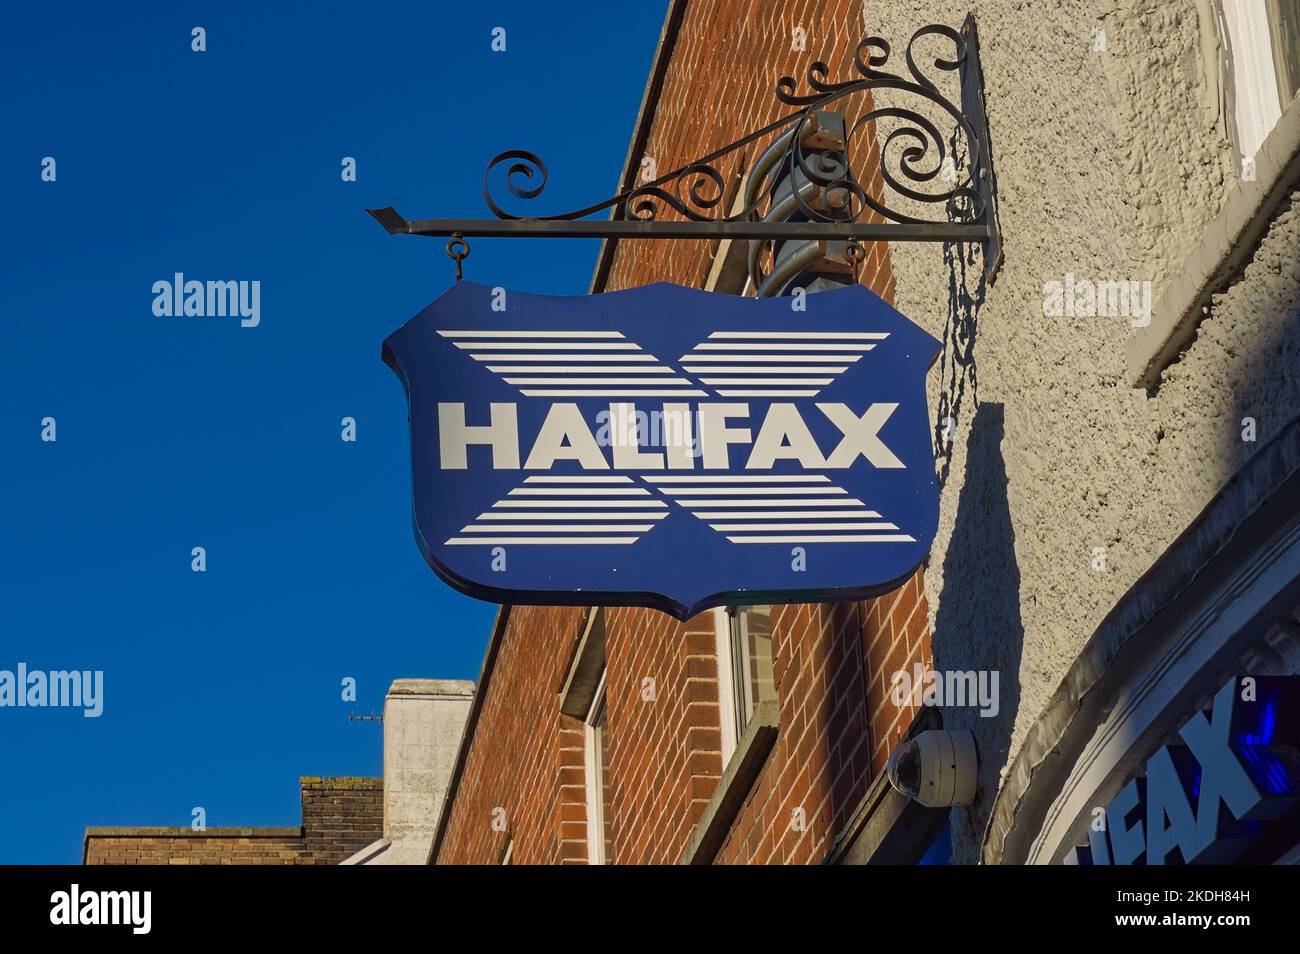 A vintage-style street sign for HALIFAX bank with blue sky in the background. Stock Photo